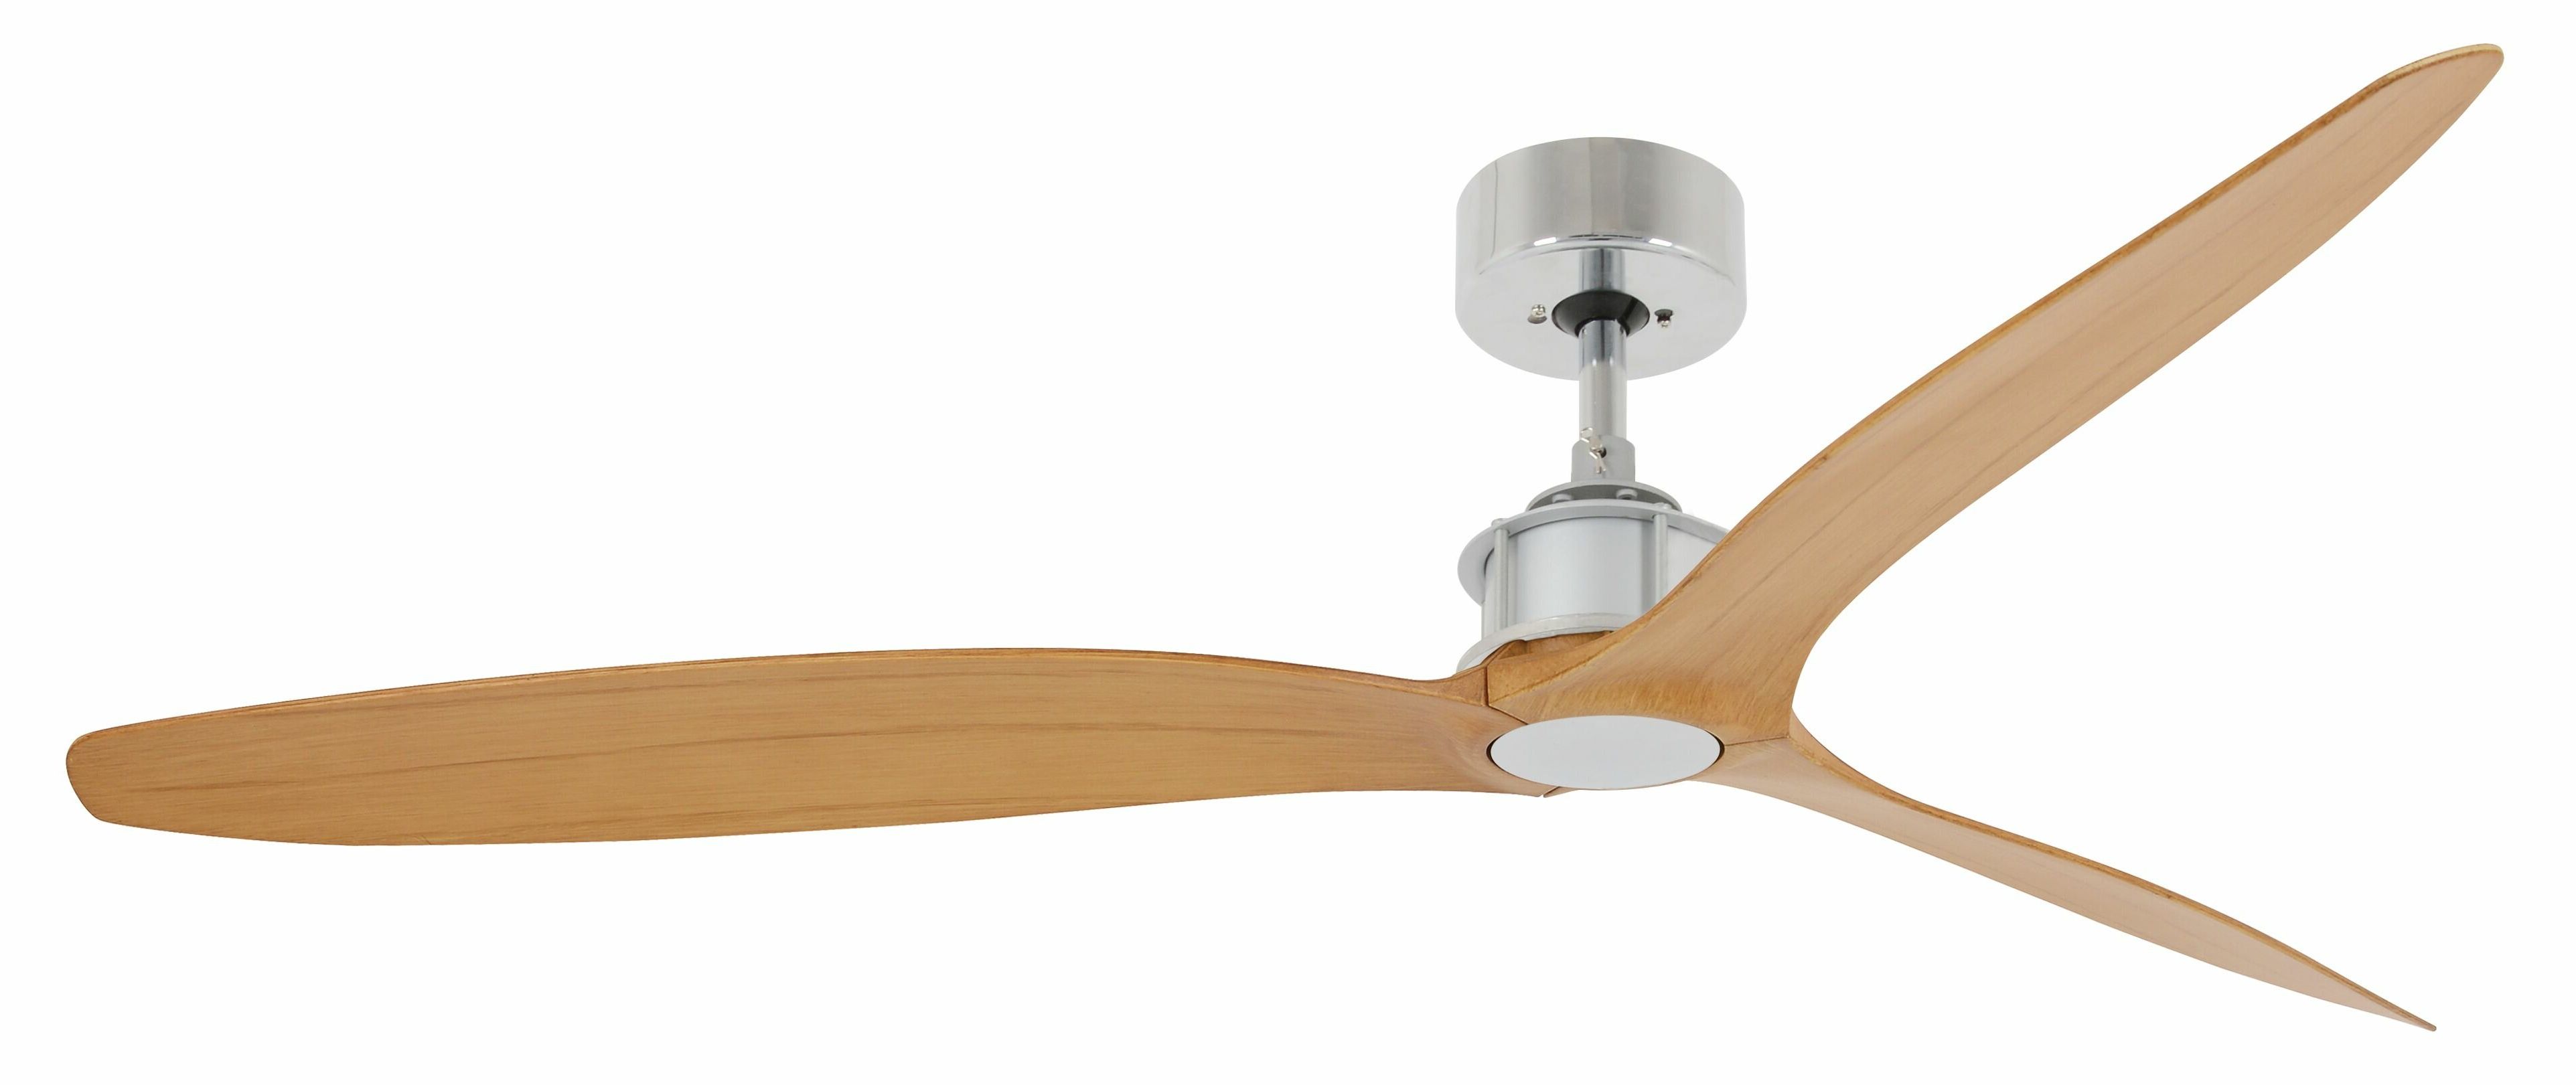 Theron Catoe 3 Blade Ceiling Fans With Most Up To Date Theron 52" Catoe 3 Blade Ceiling Fan With Remote (View 4 of 20)